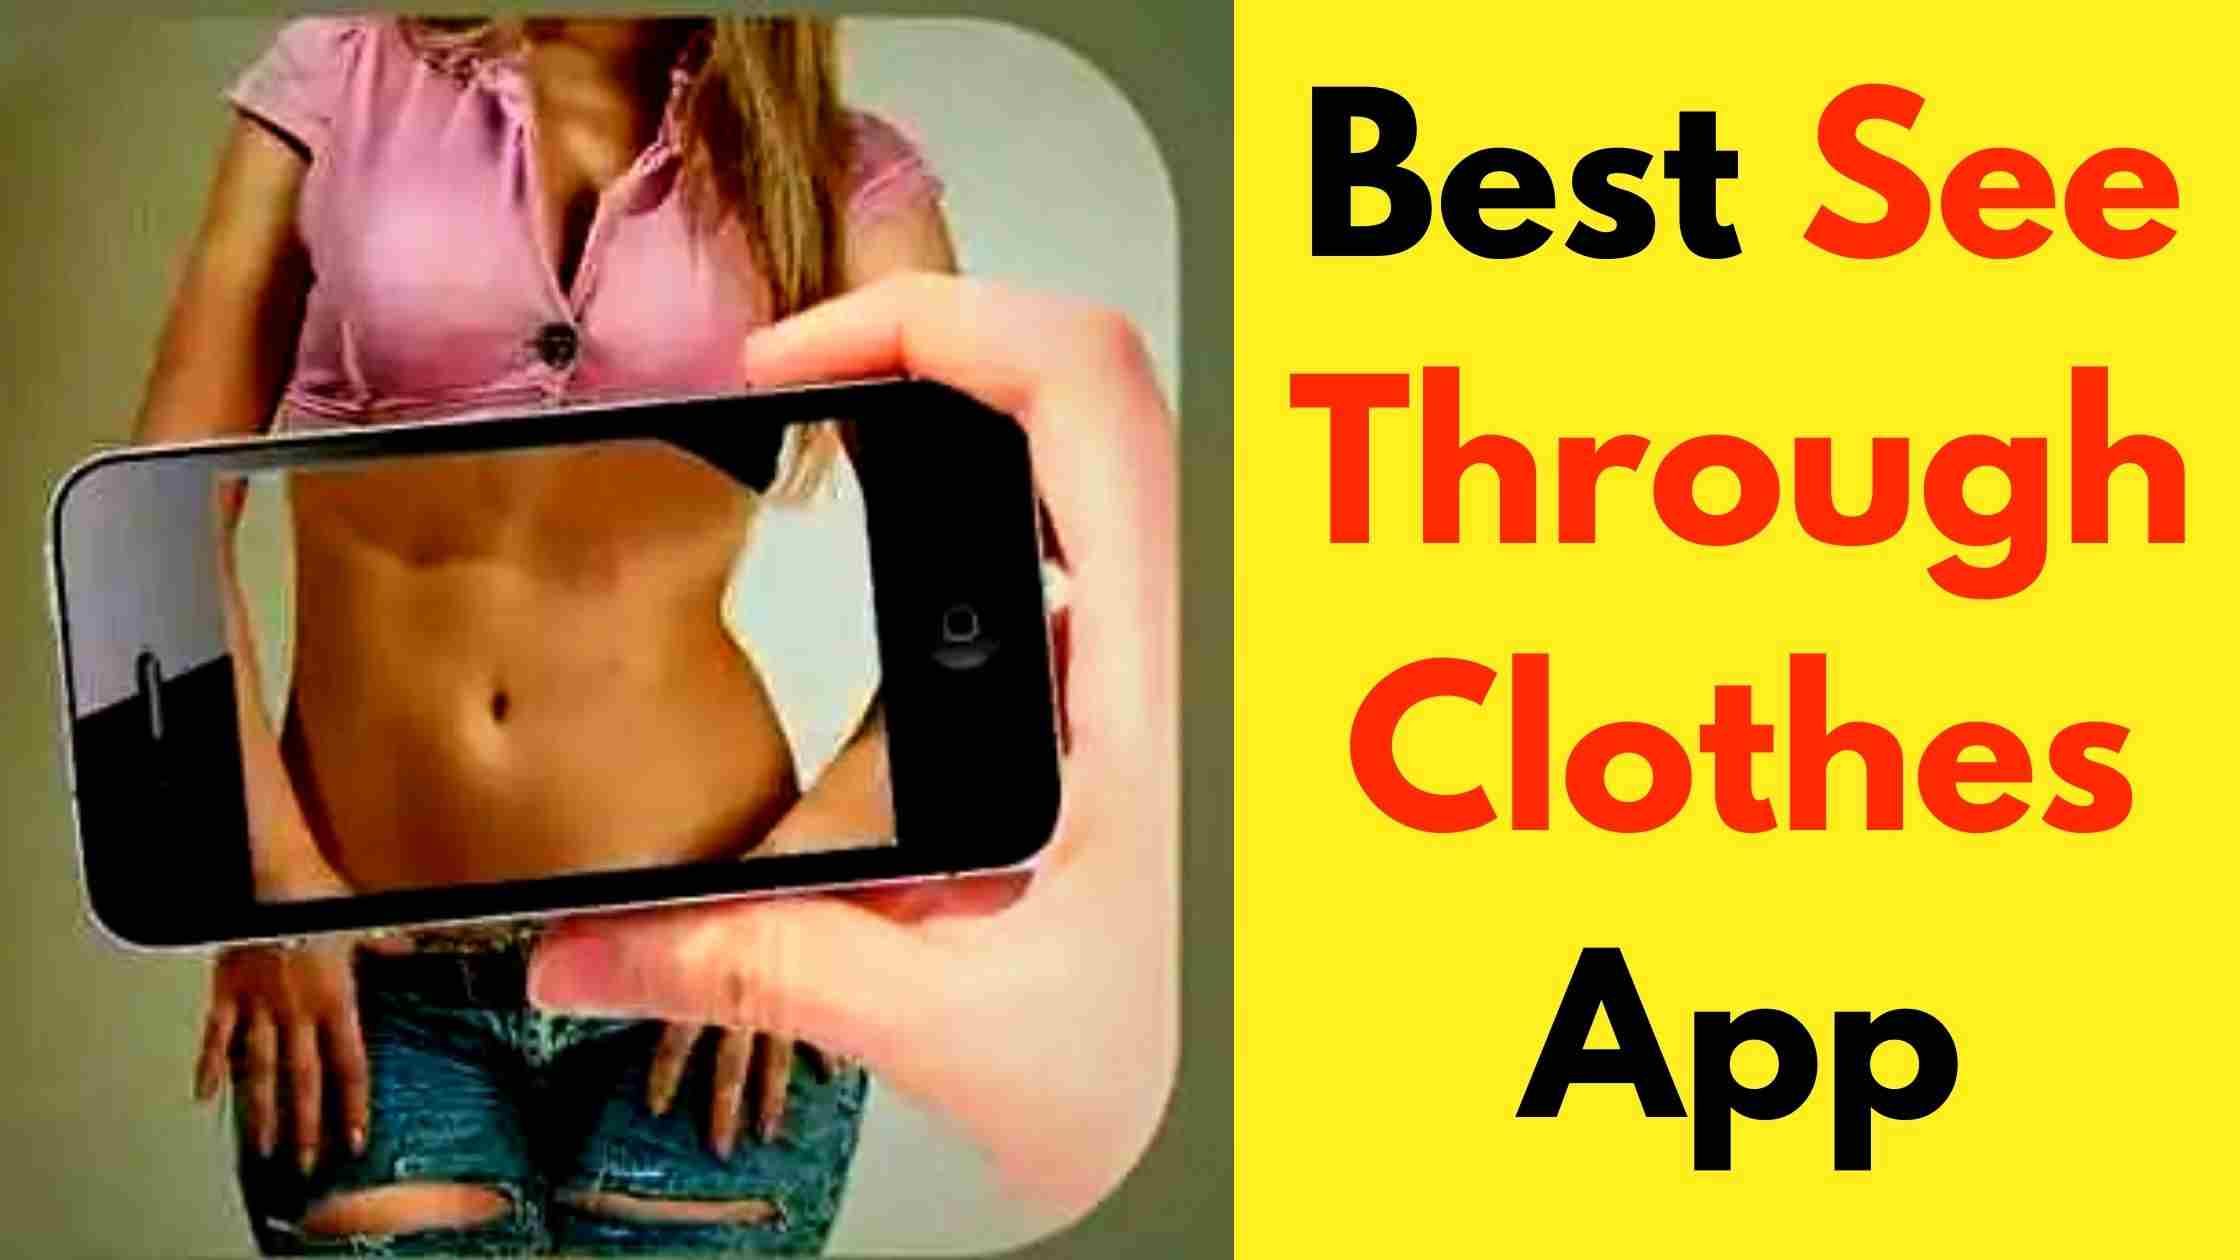 christopher francis share see through clothes app real photos